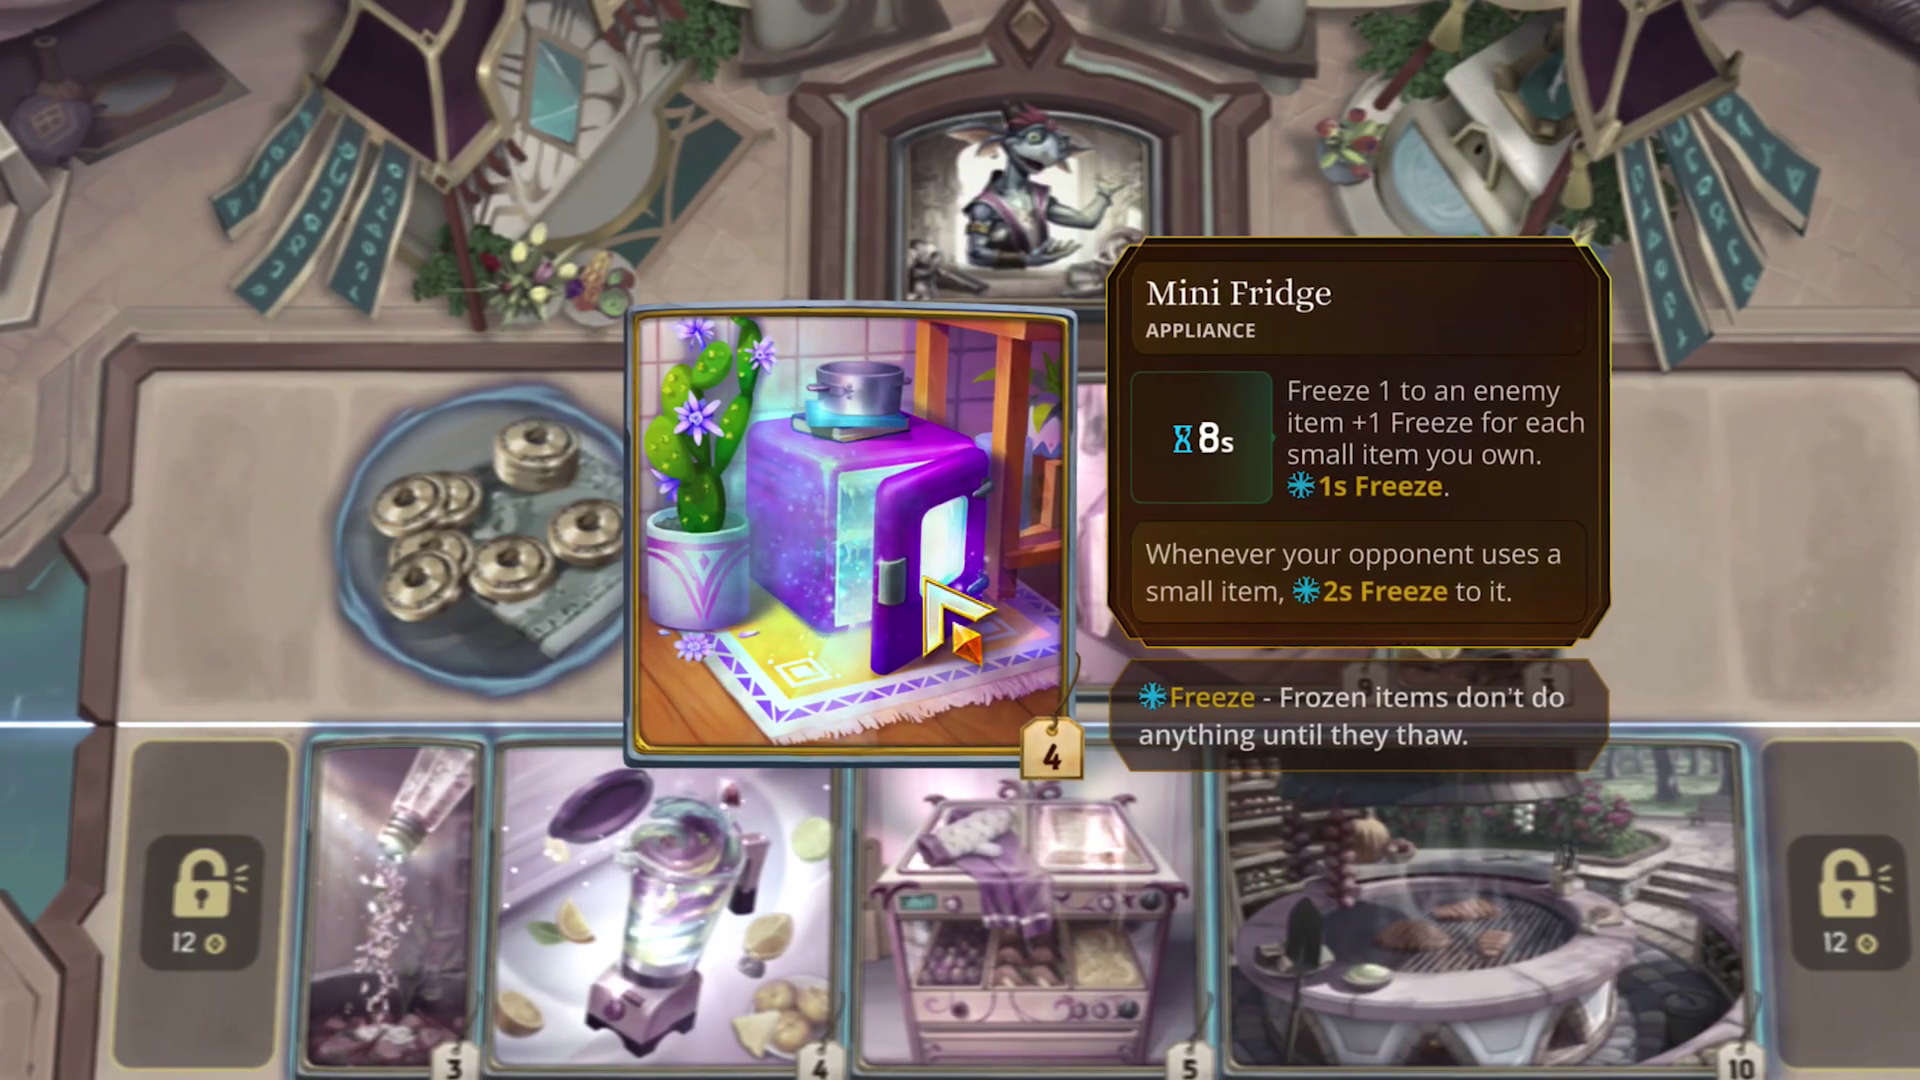 Mini Fridge is one of the cards available in the game. In this image, you can see what the card effect is and how long it lasts. Freeze is one of the status effects in the game.